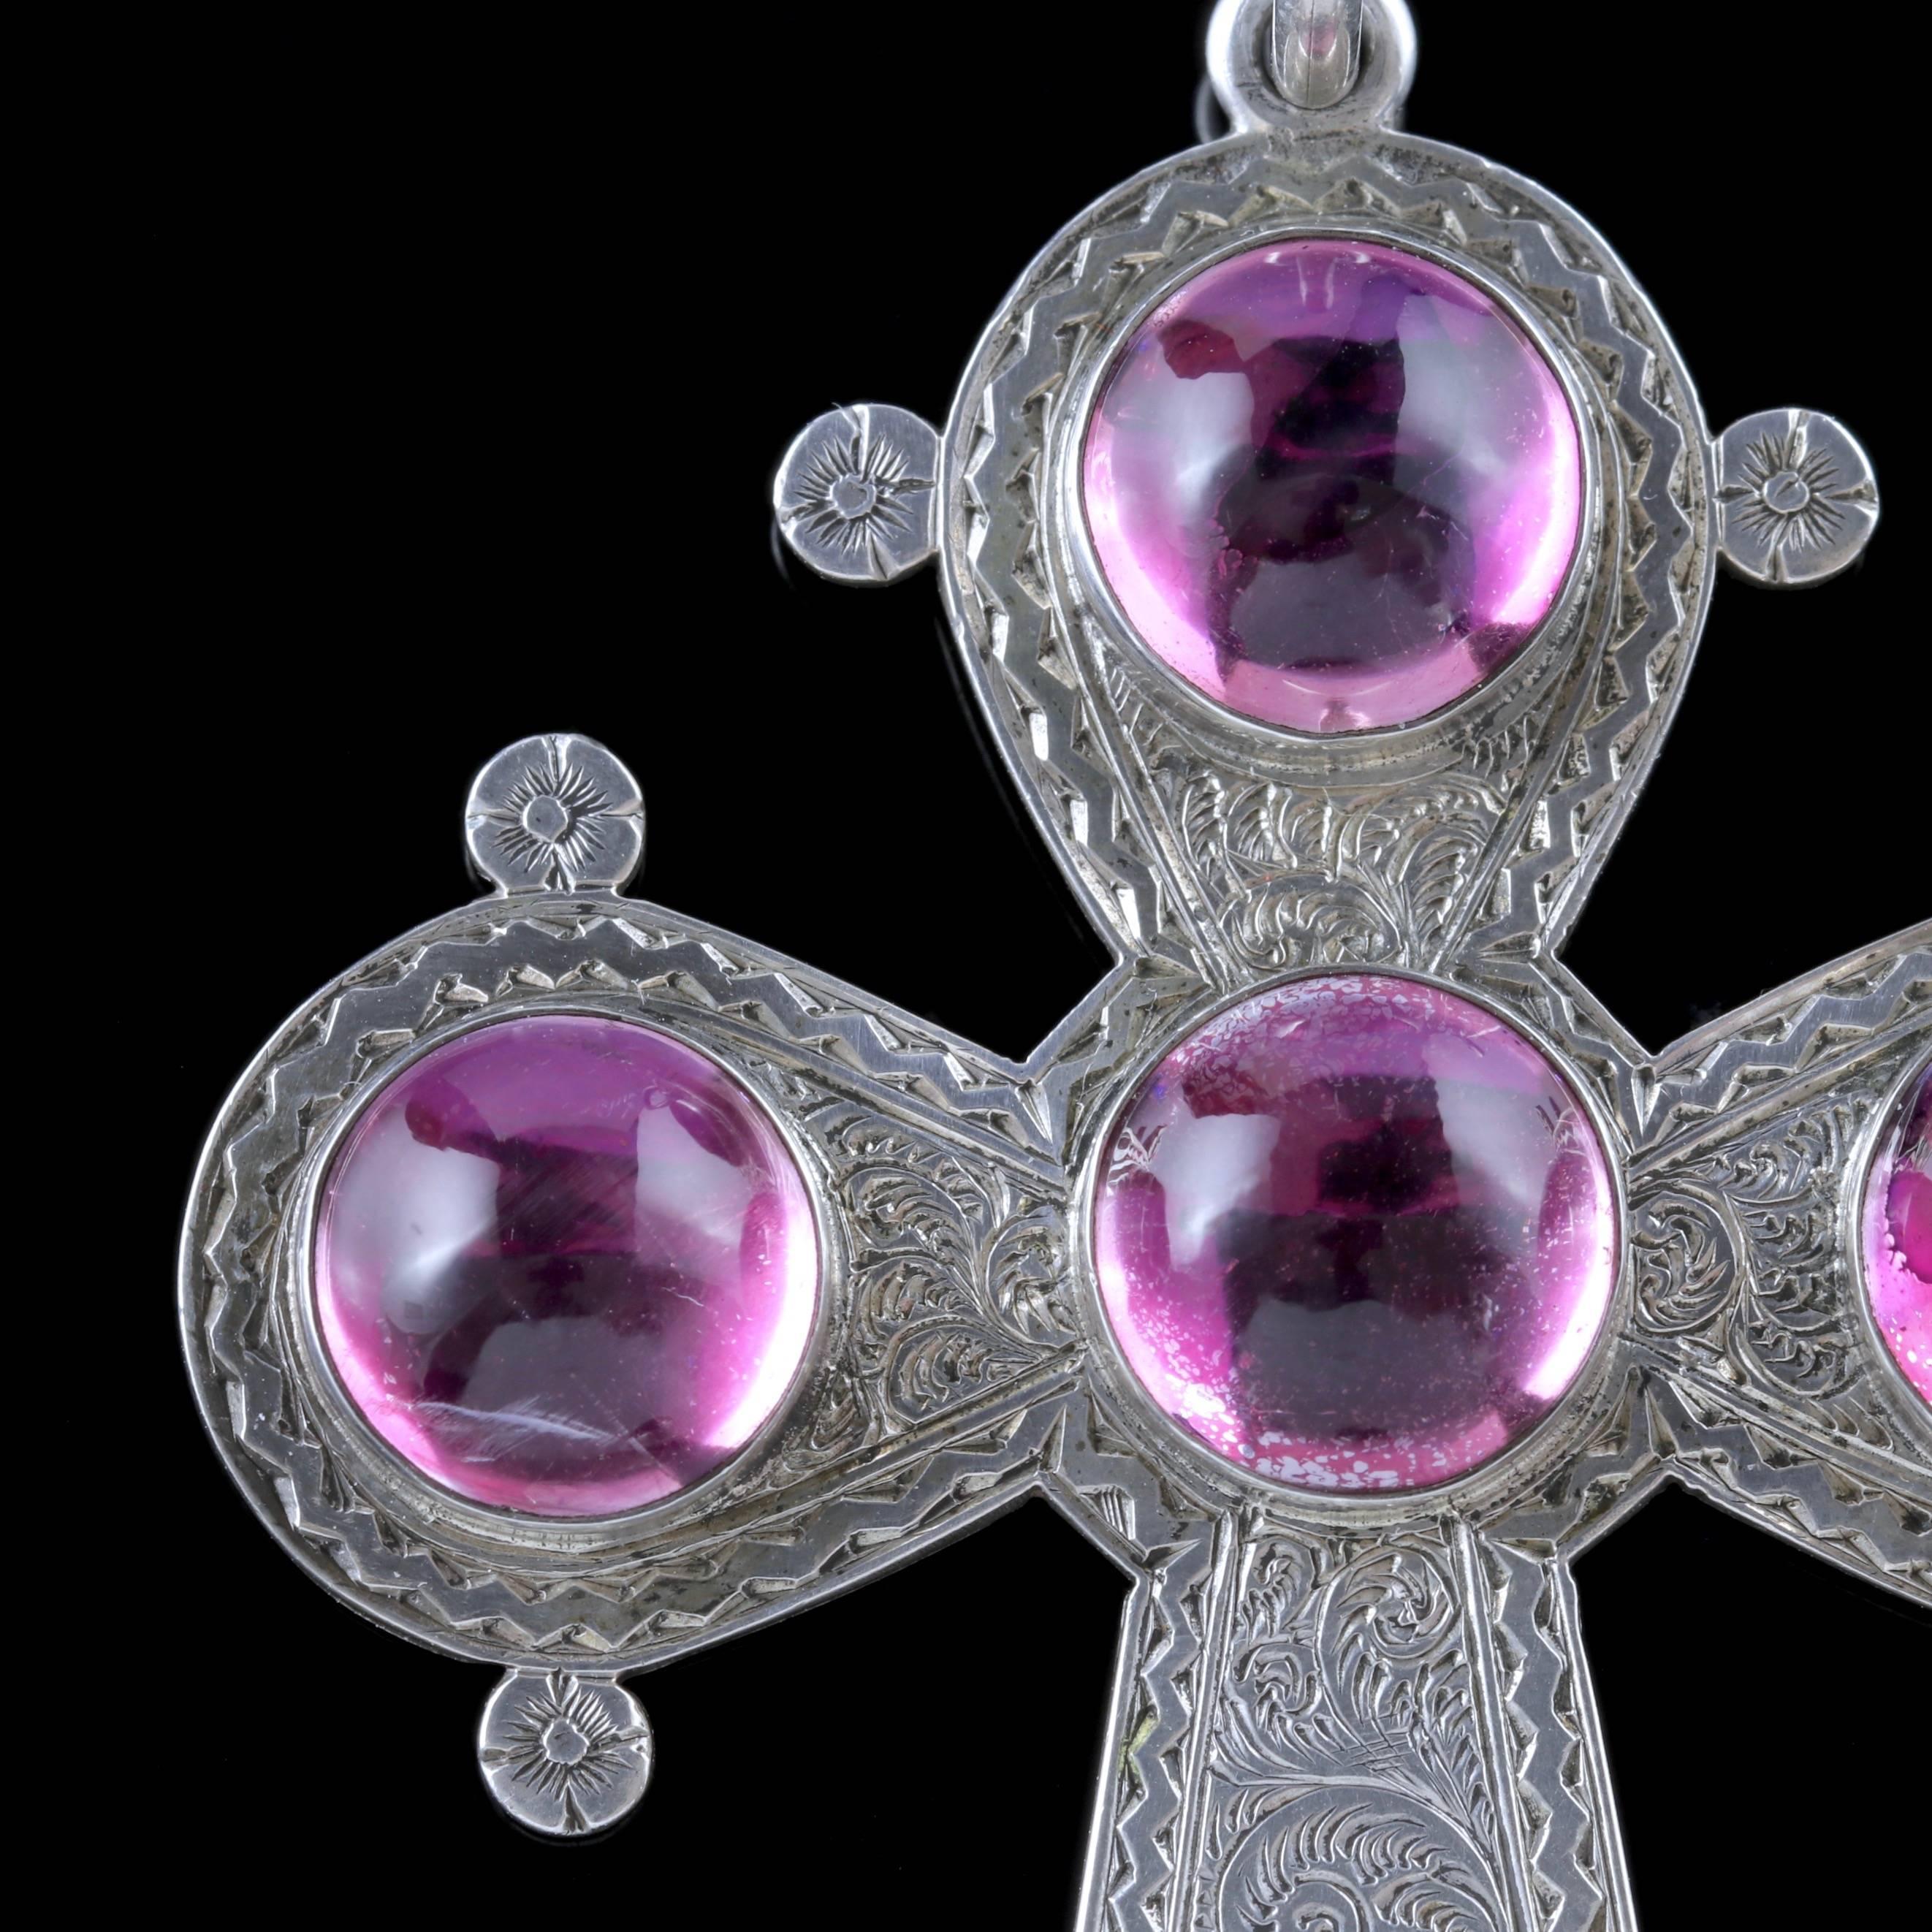 To read more please click continue reading below-

This magnificent antique Victorian Silver cross pendant is Circa 1900.

The wonderful piece is adorned with five beautiful cabochon Rock Crystal stones which are backed with violet foil to simulate